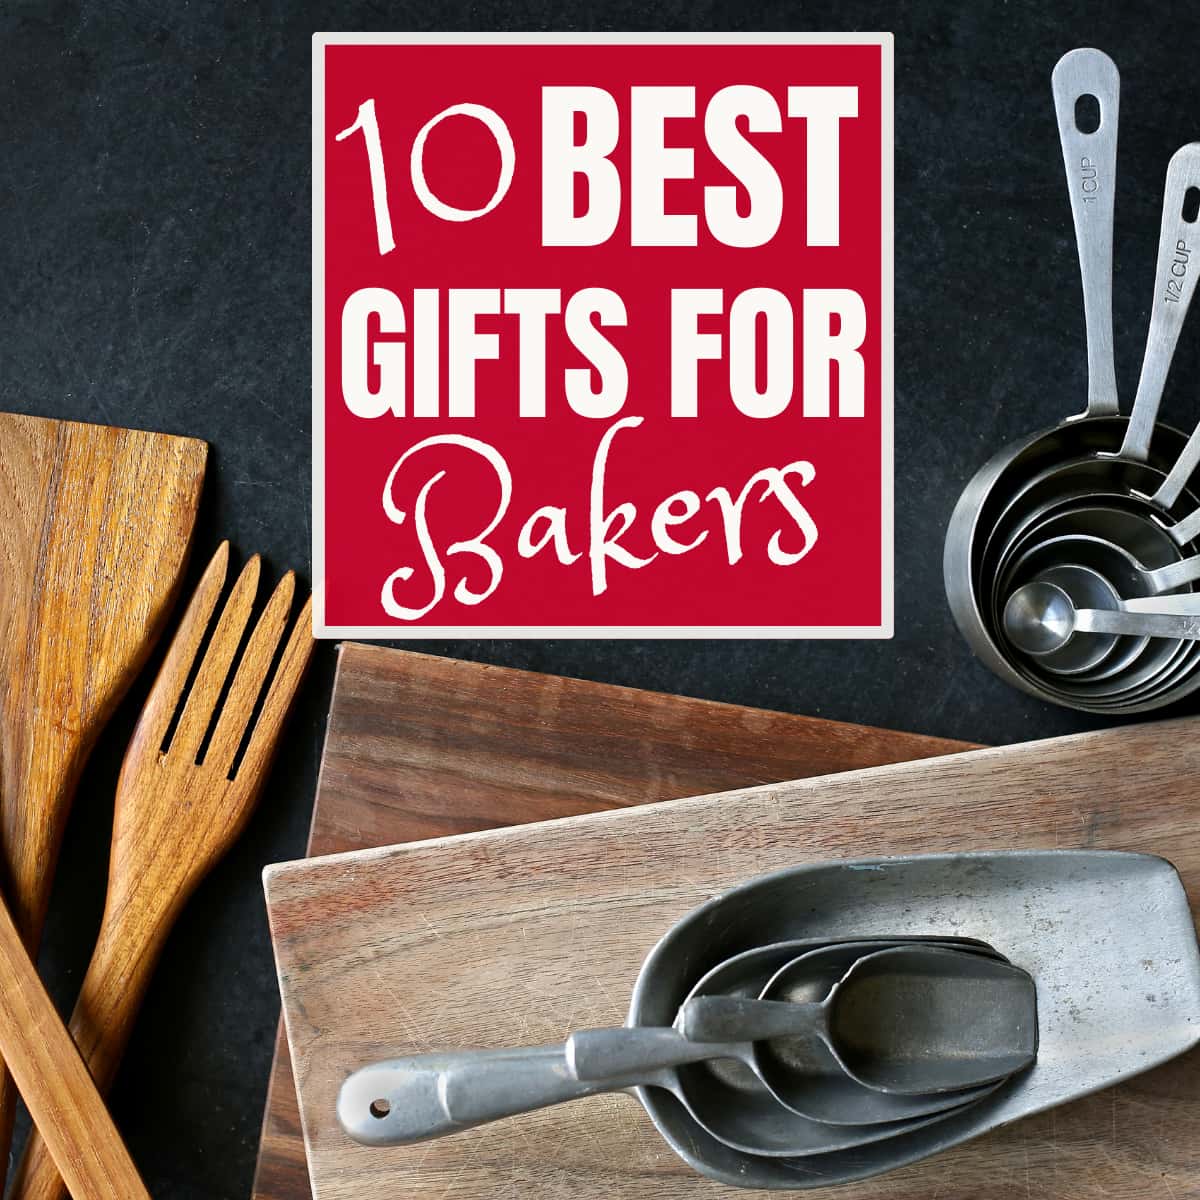 A collection of gifts for bakers with text overlay.